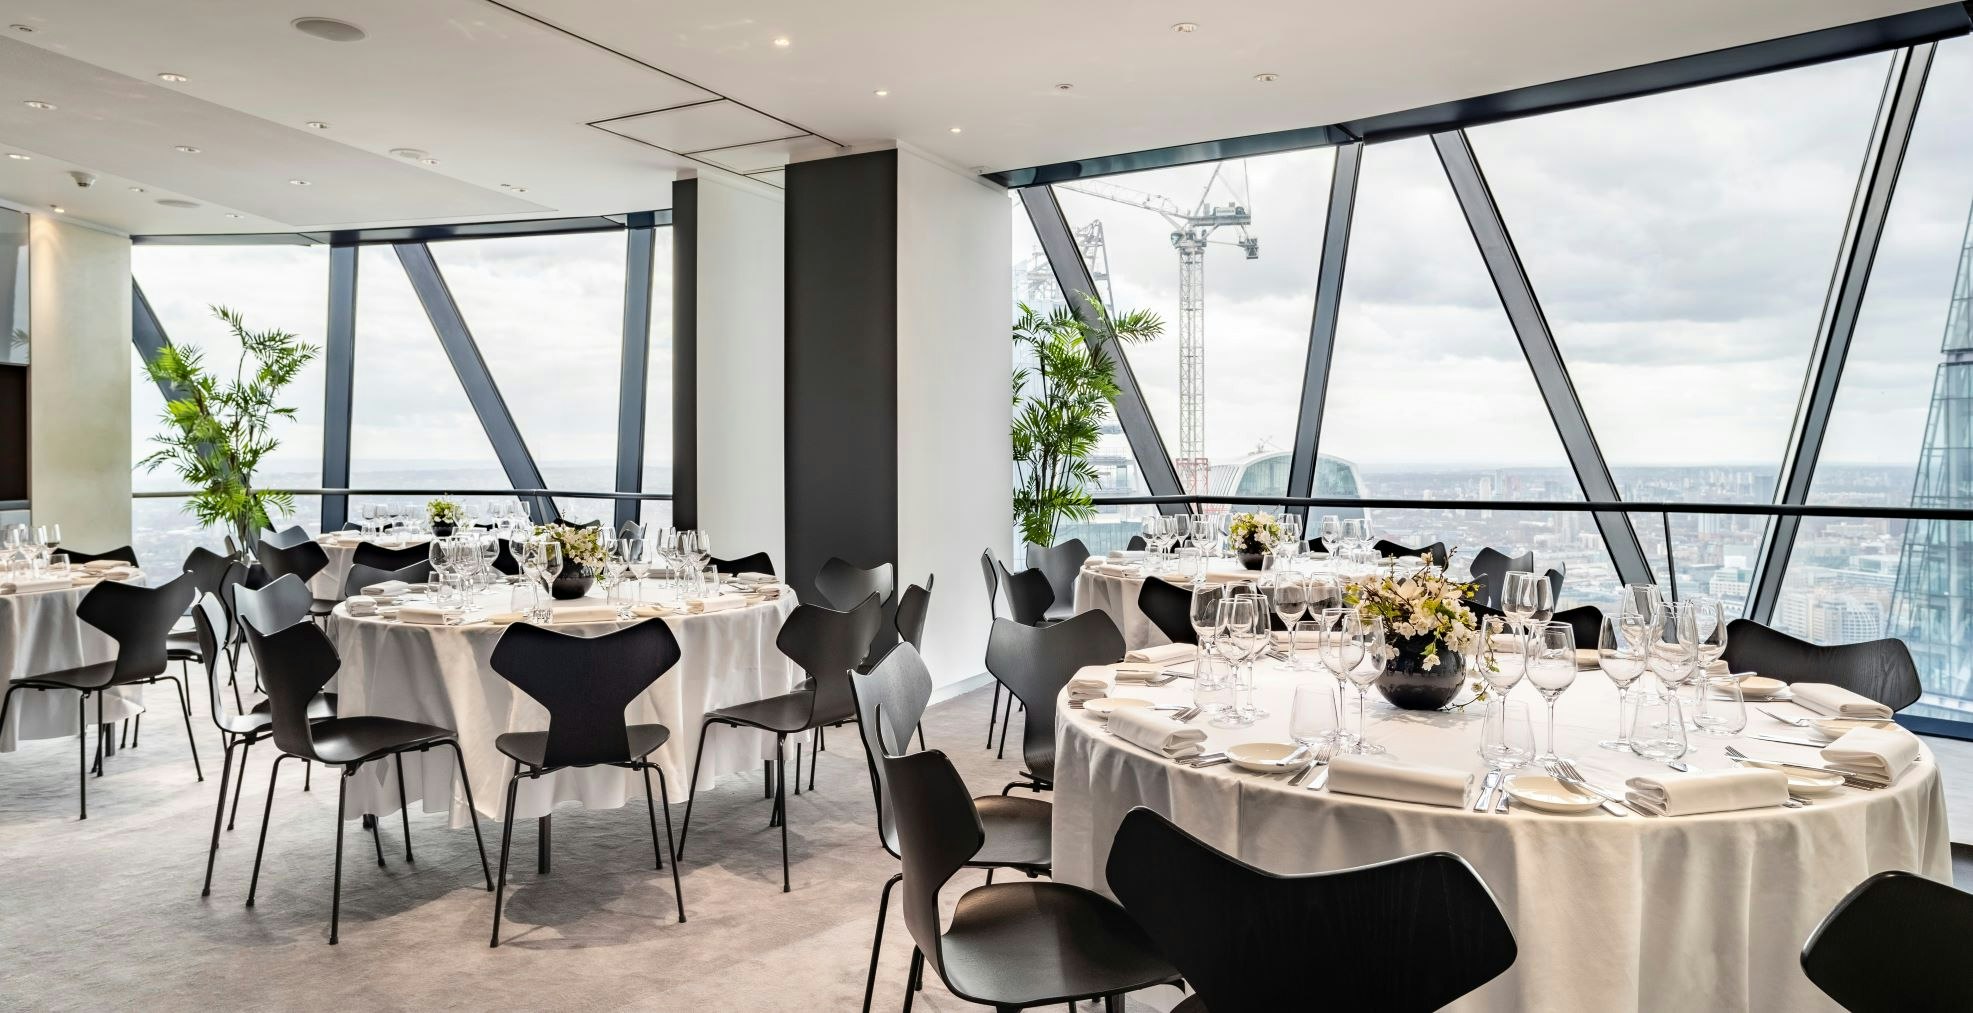 Filming Locations Venues in South London - Searcys at the Gherkin